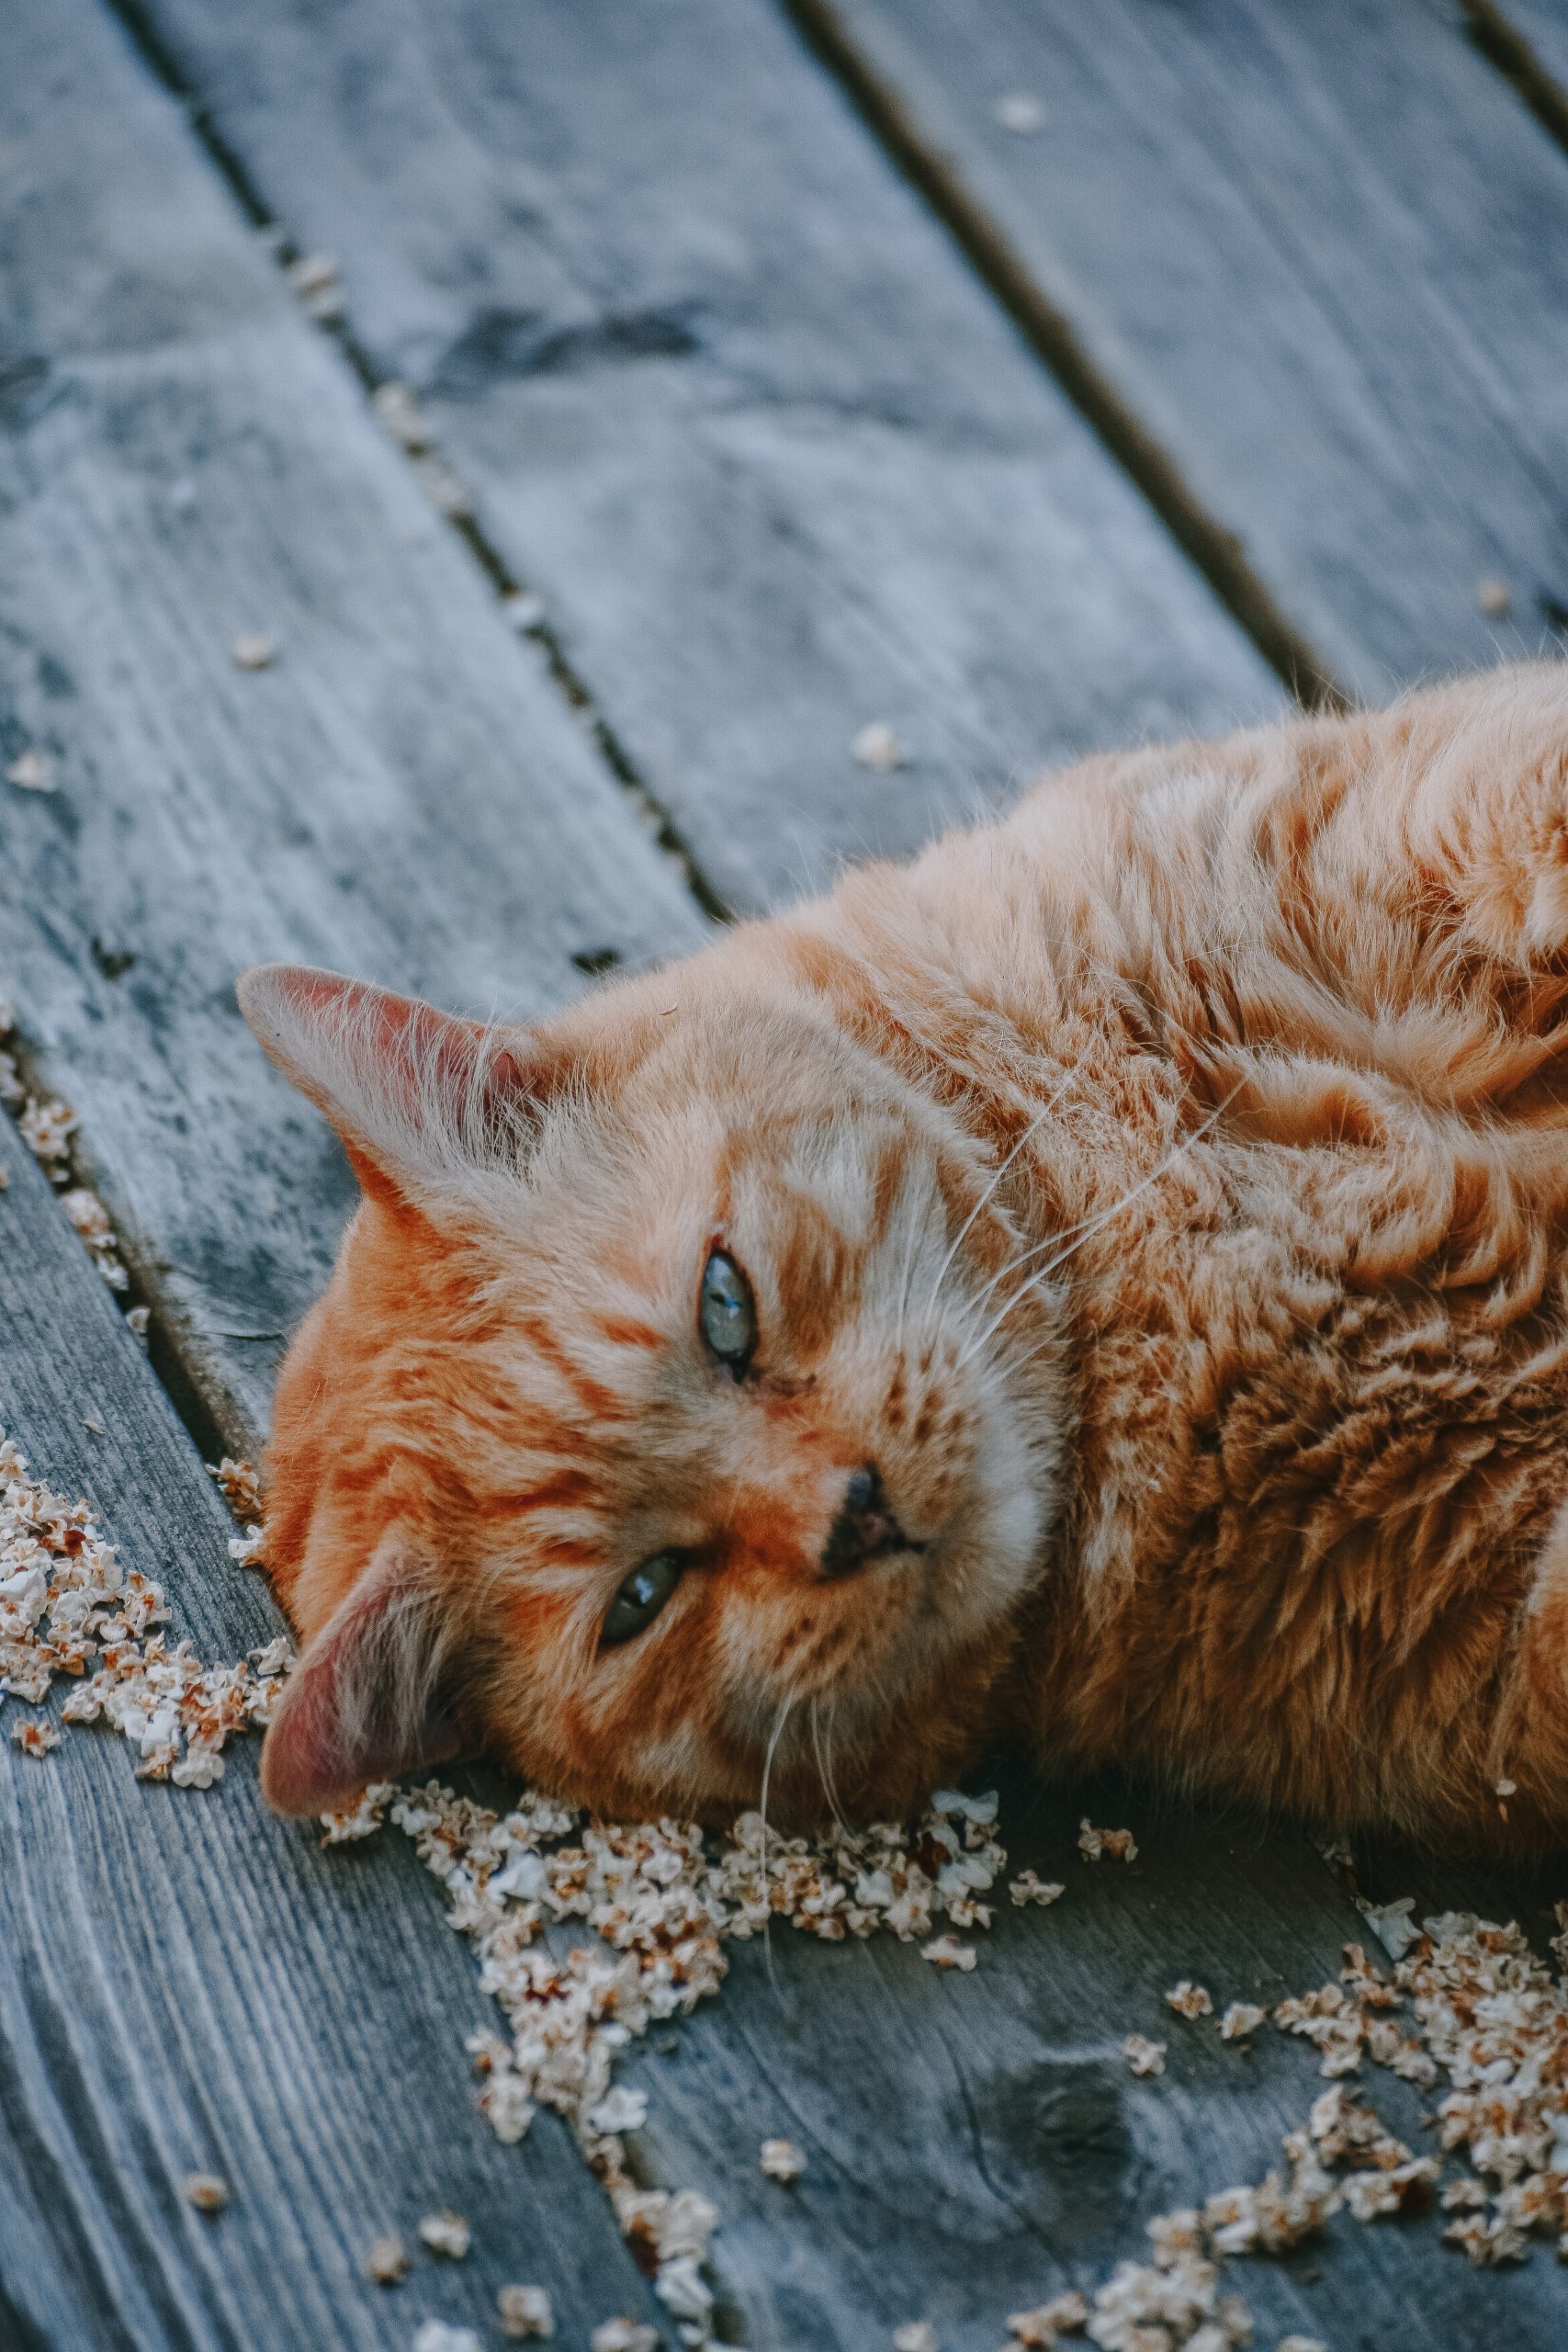 A large orange tabby cat lays on a wooden floor